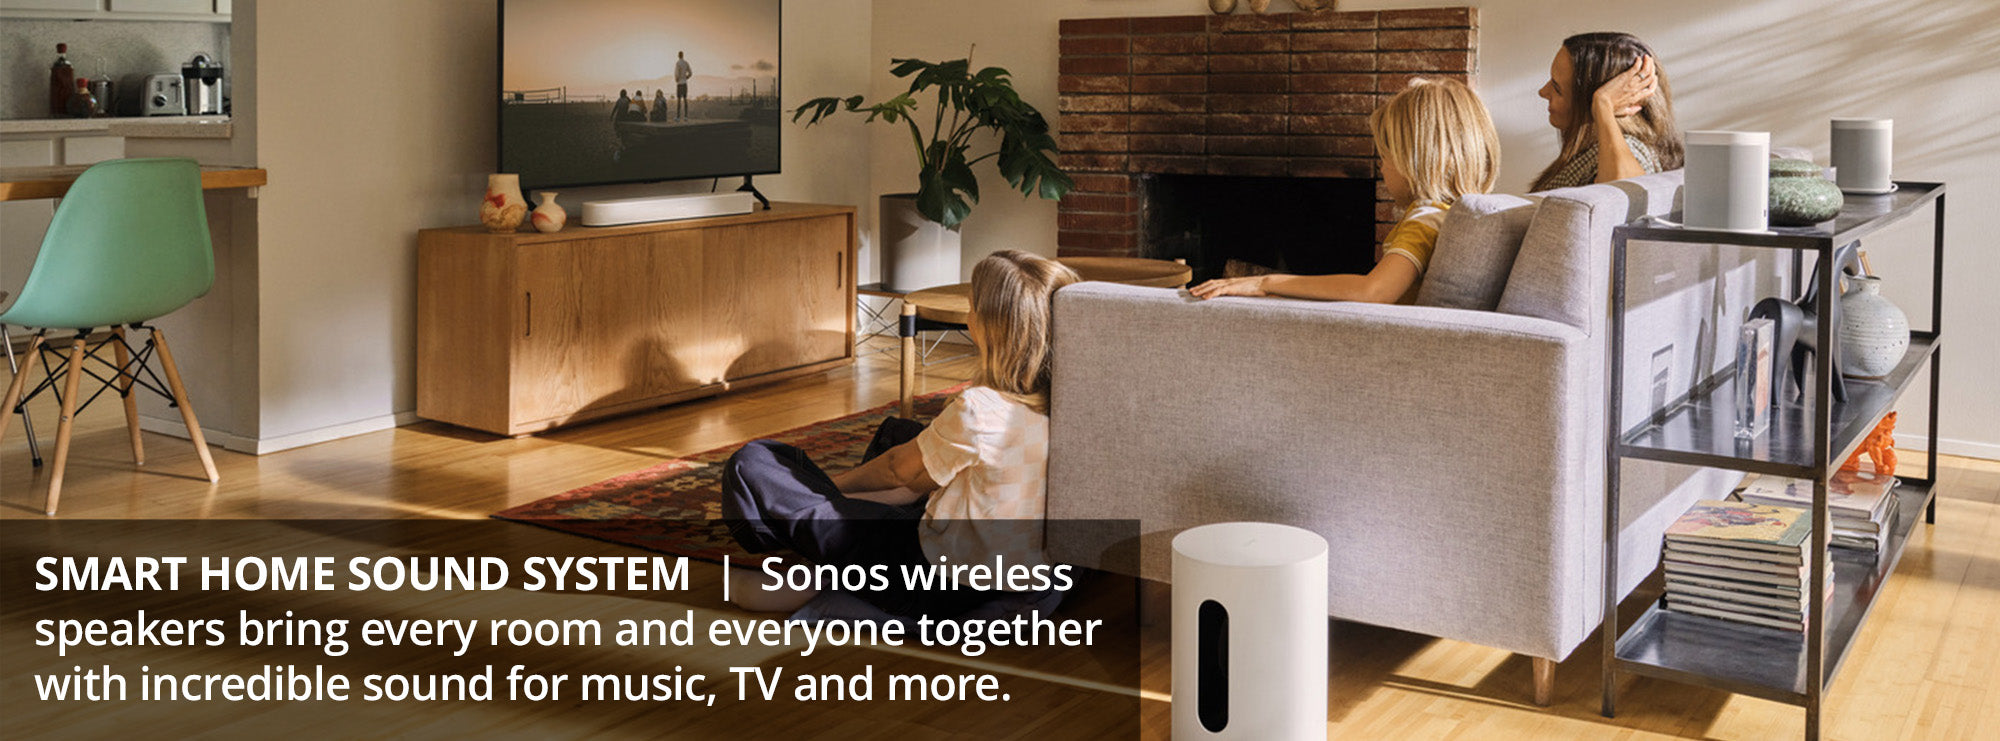 Smart home sound system  Sonos wireless speakers bring every room and everyone together with incredible sound for music, TV and more.